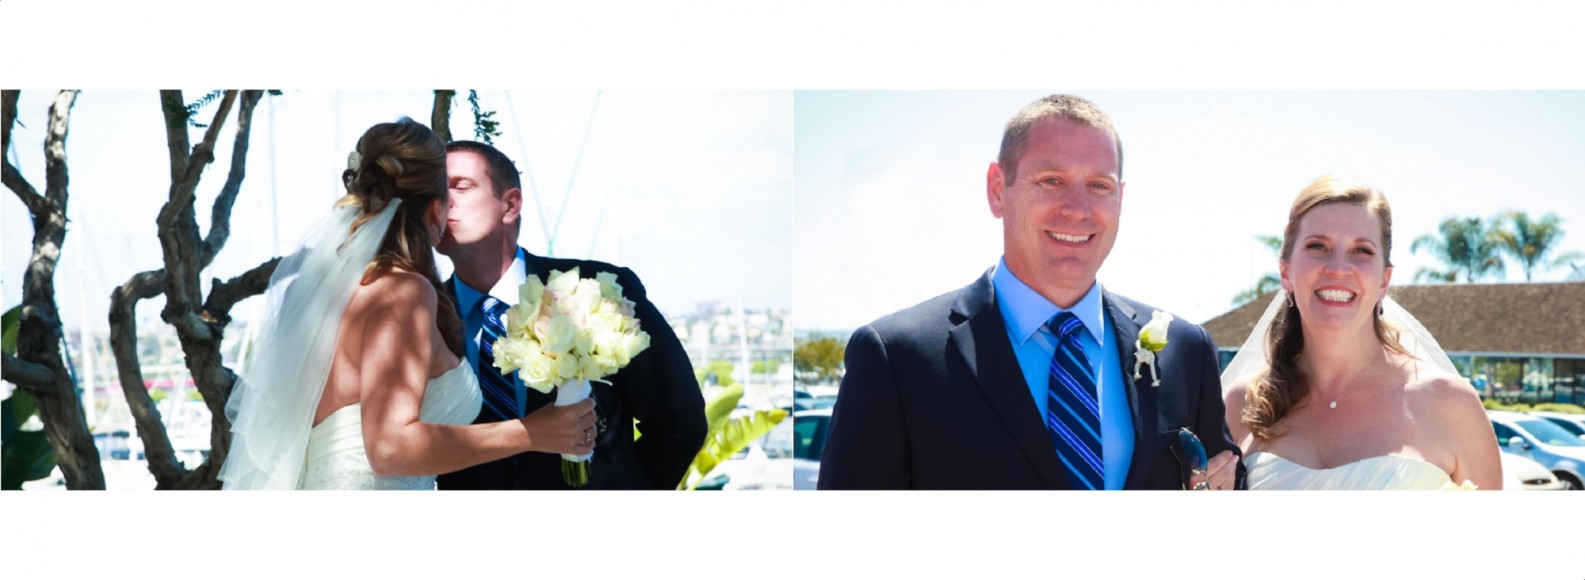 Laura and Davids Wedding Book - San Diego Yacht Wedding by Wedding Photographers Andrew Abouna - Pages 8-9